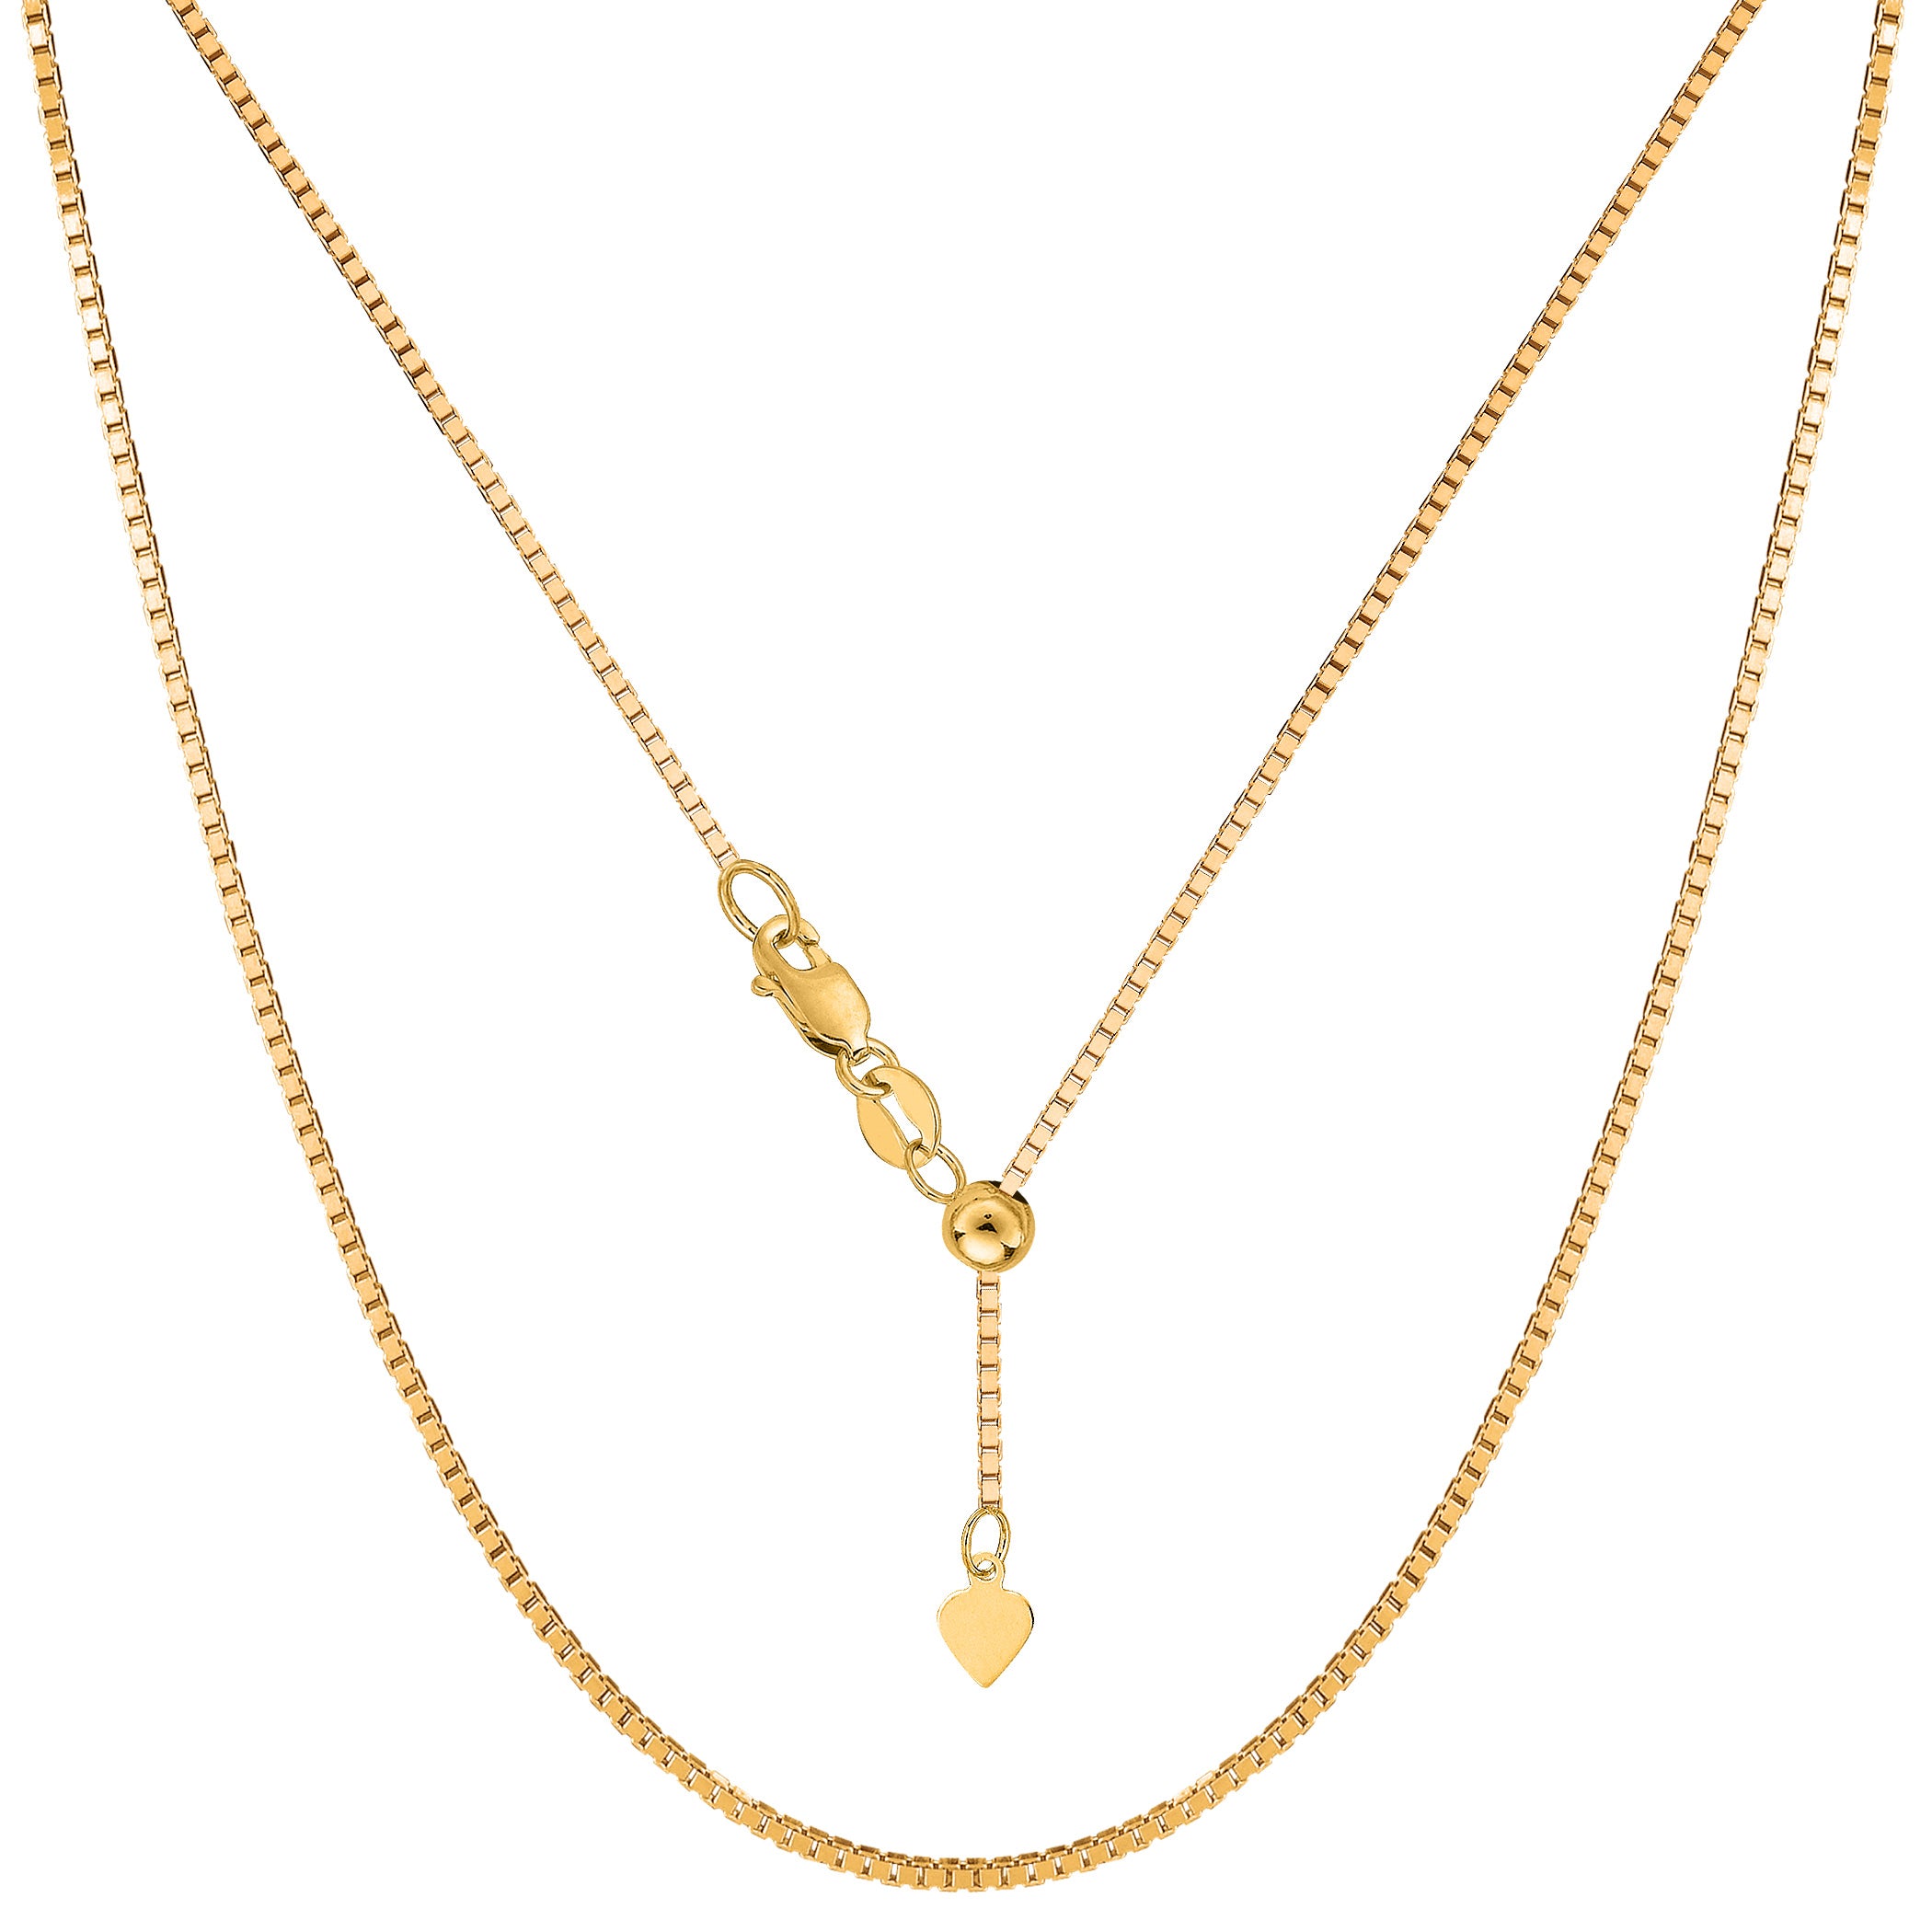 Sterling Silver Yellow Tone Plated 22" Sliding Adjustable Box Chain Necklace, 1.4mm